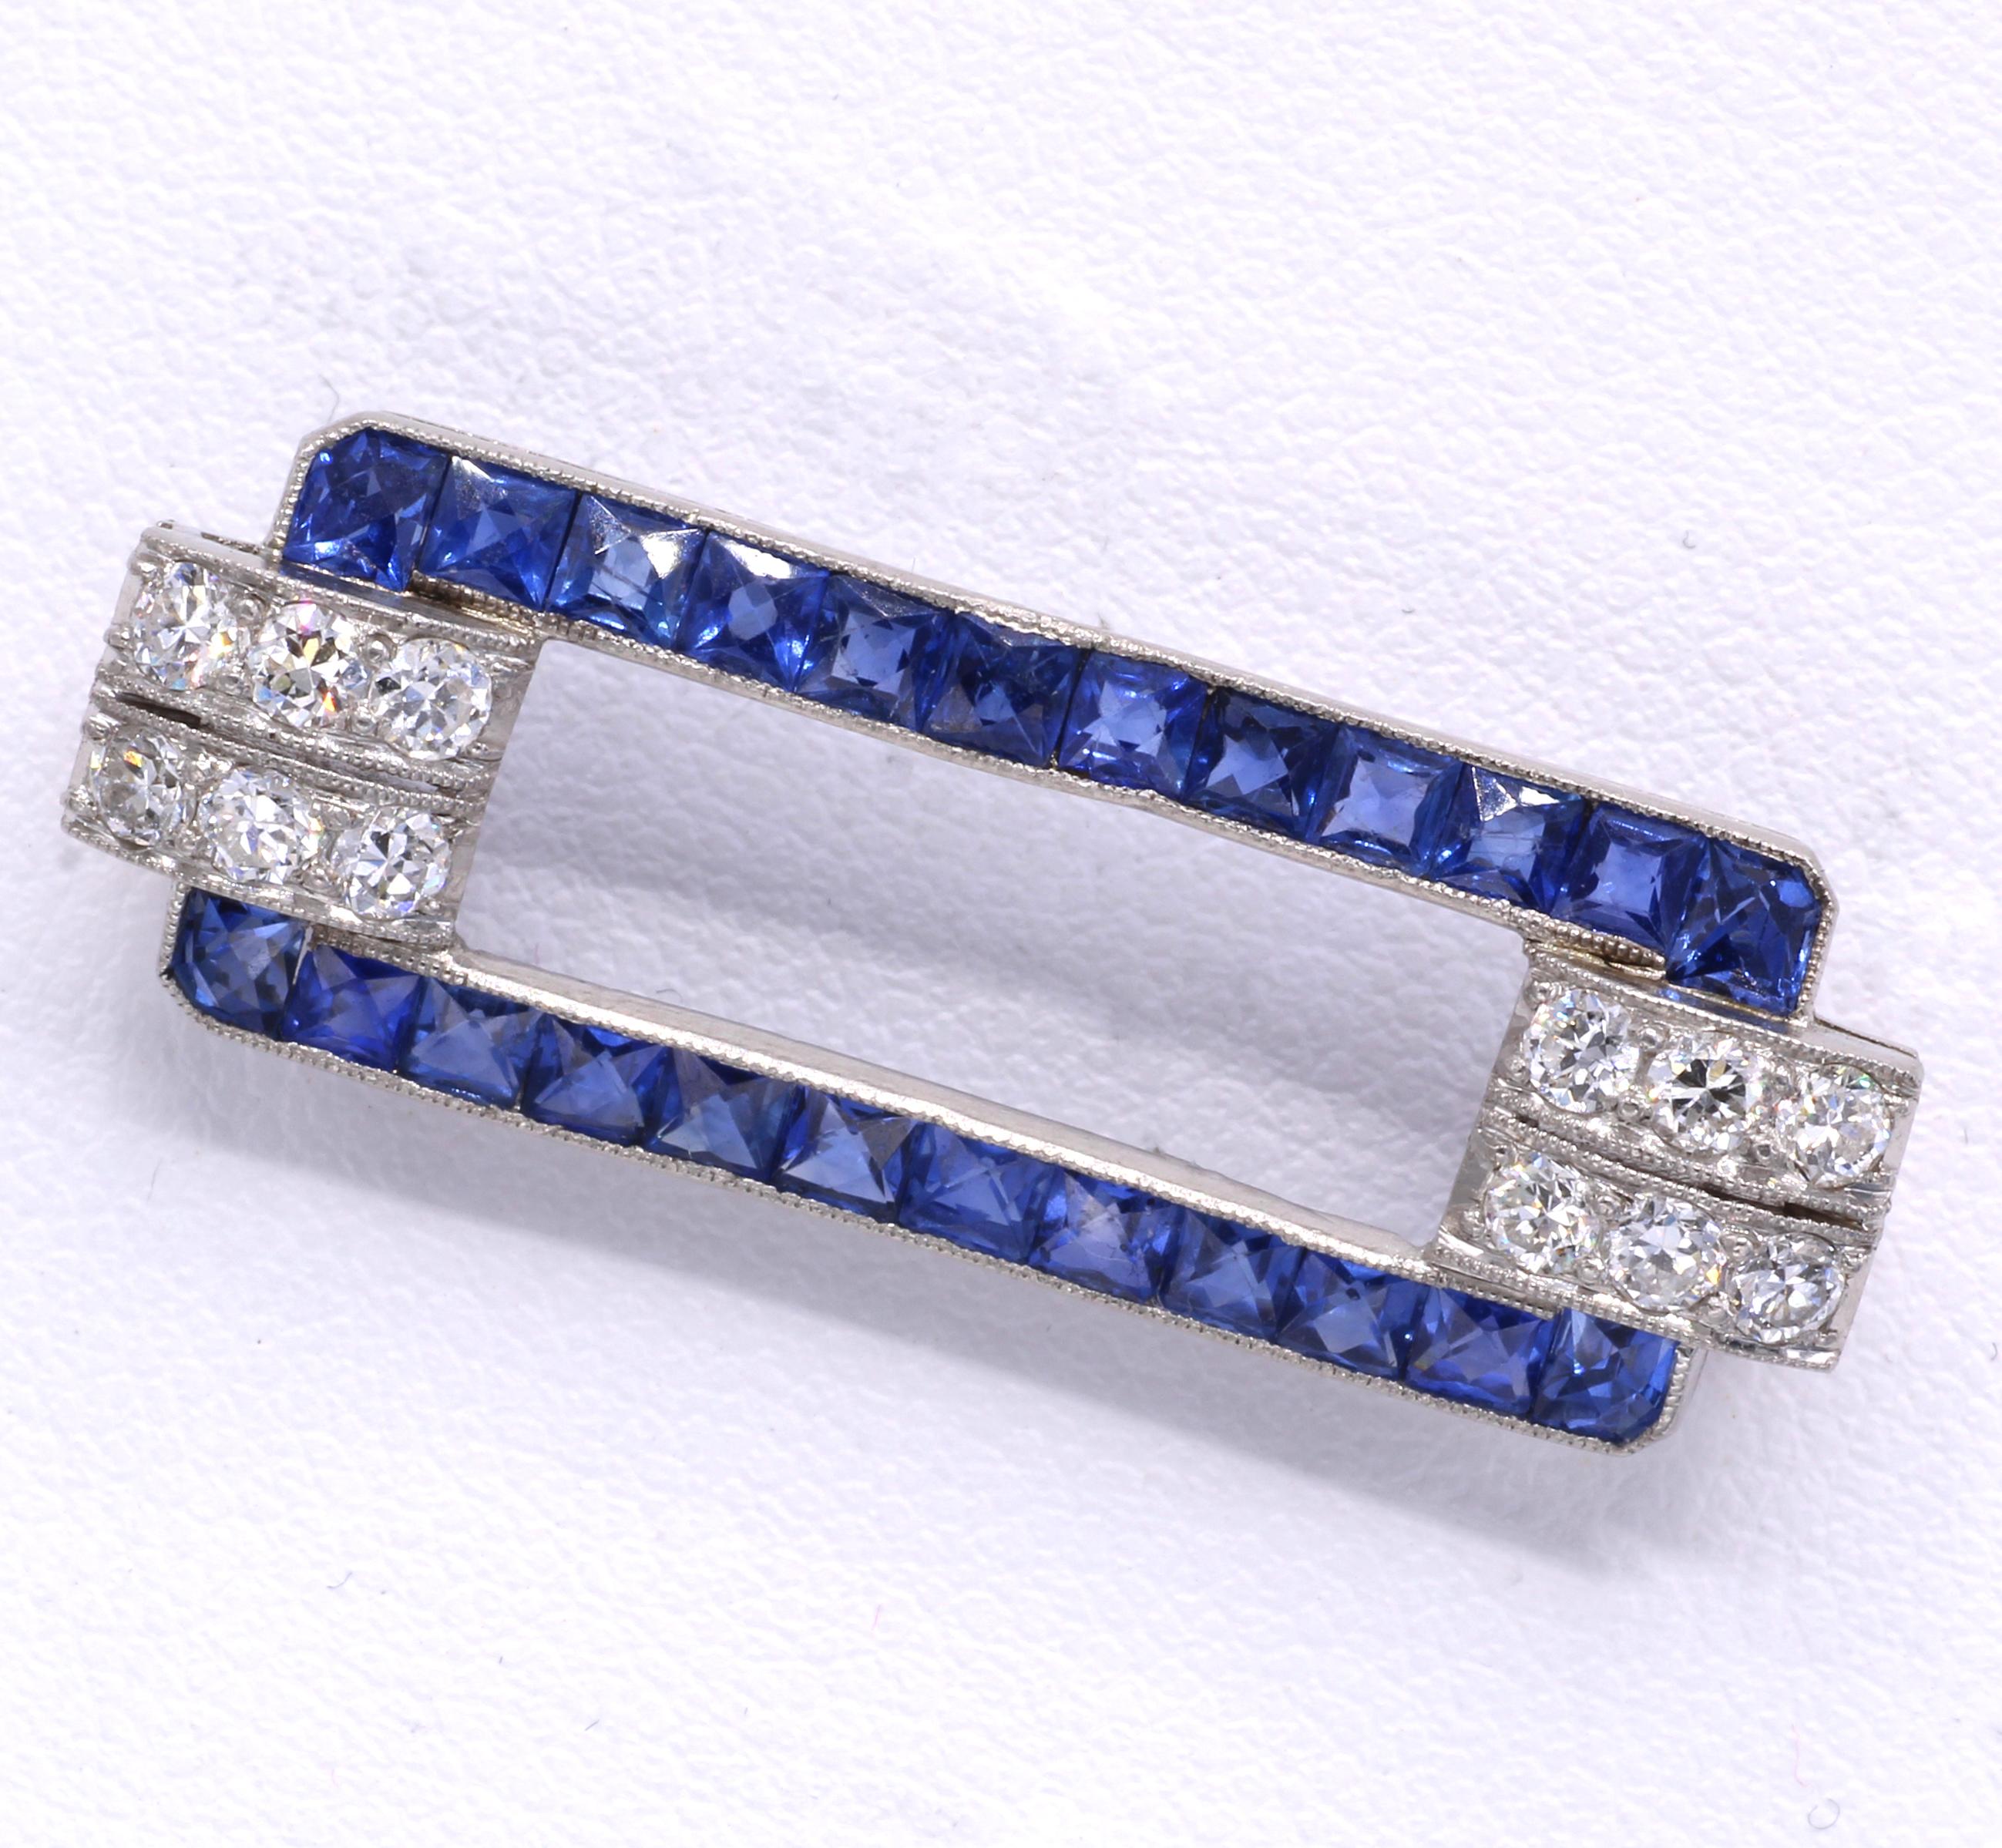 Masterfully handcrafted by Tiffany & Co this Art Deco brooch from ca 1925 is set with 24 perfectly matched cornflower blue french-cut sapphires channel set within a platinum bezel. Either end of the brooch is embellished by 6 also perfectly matched